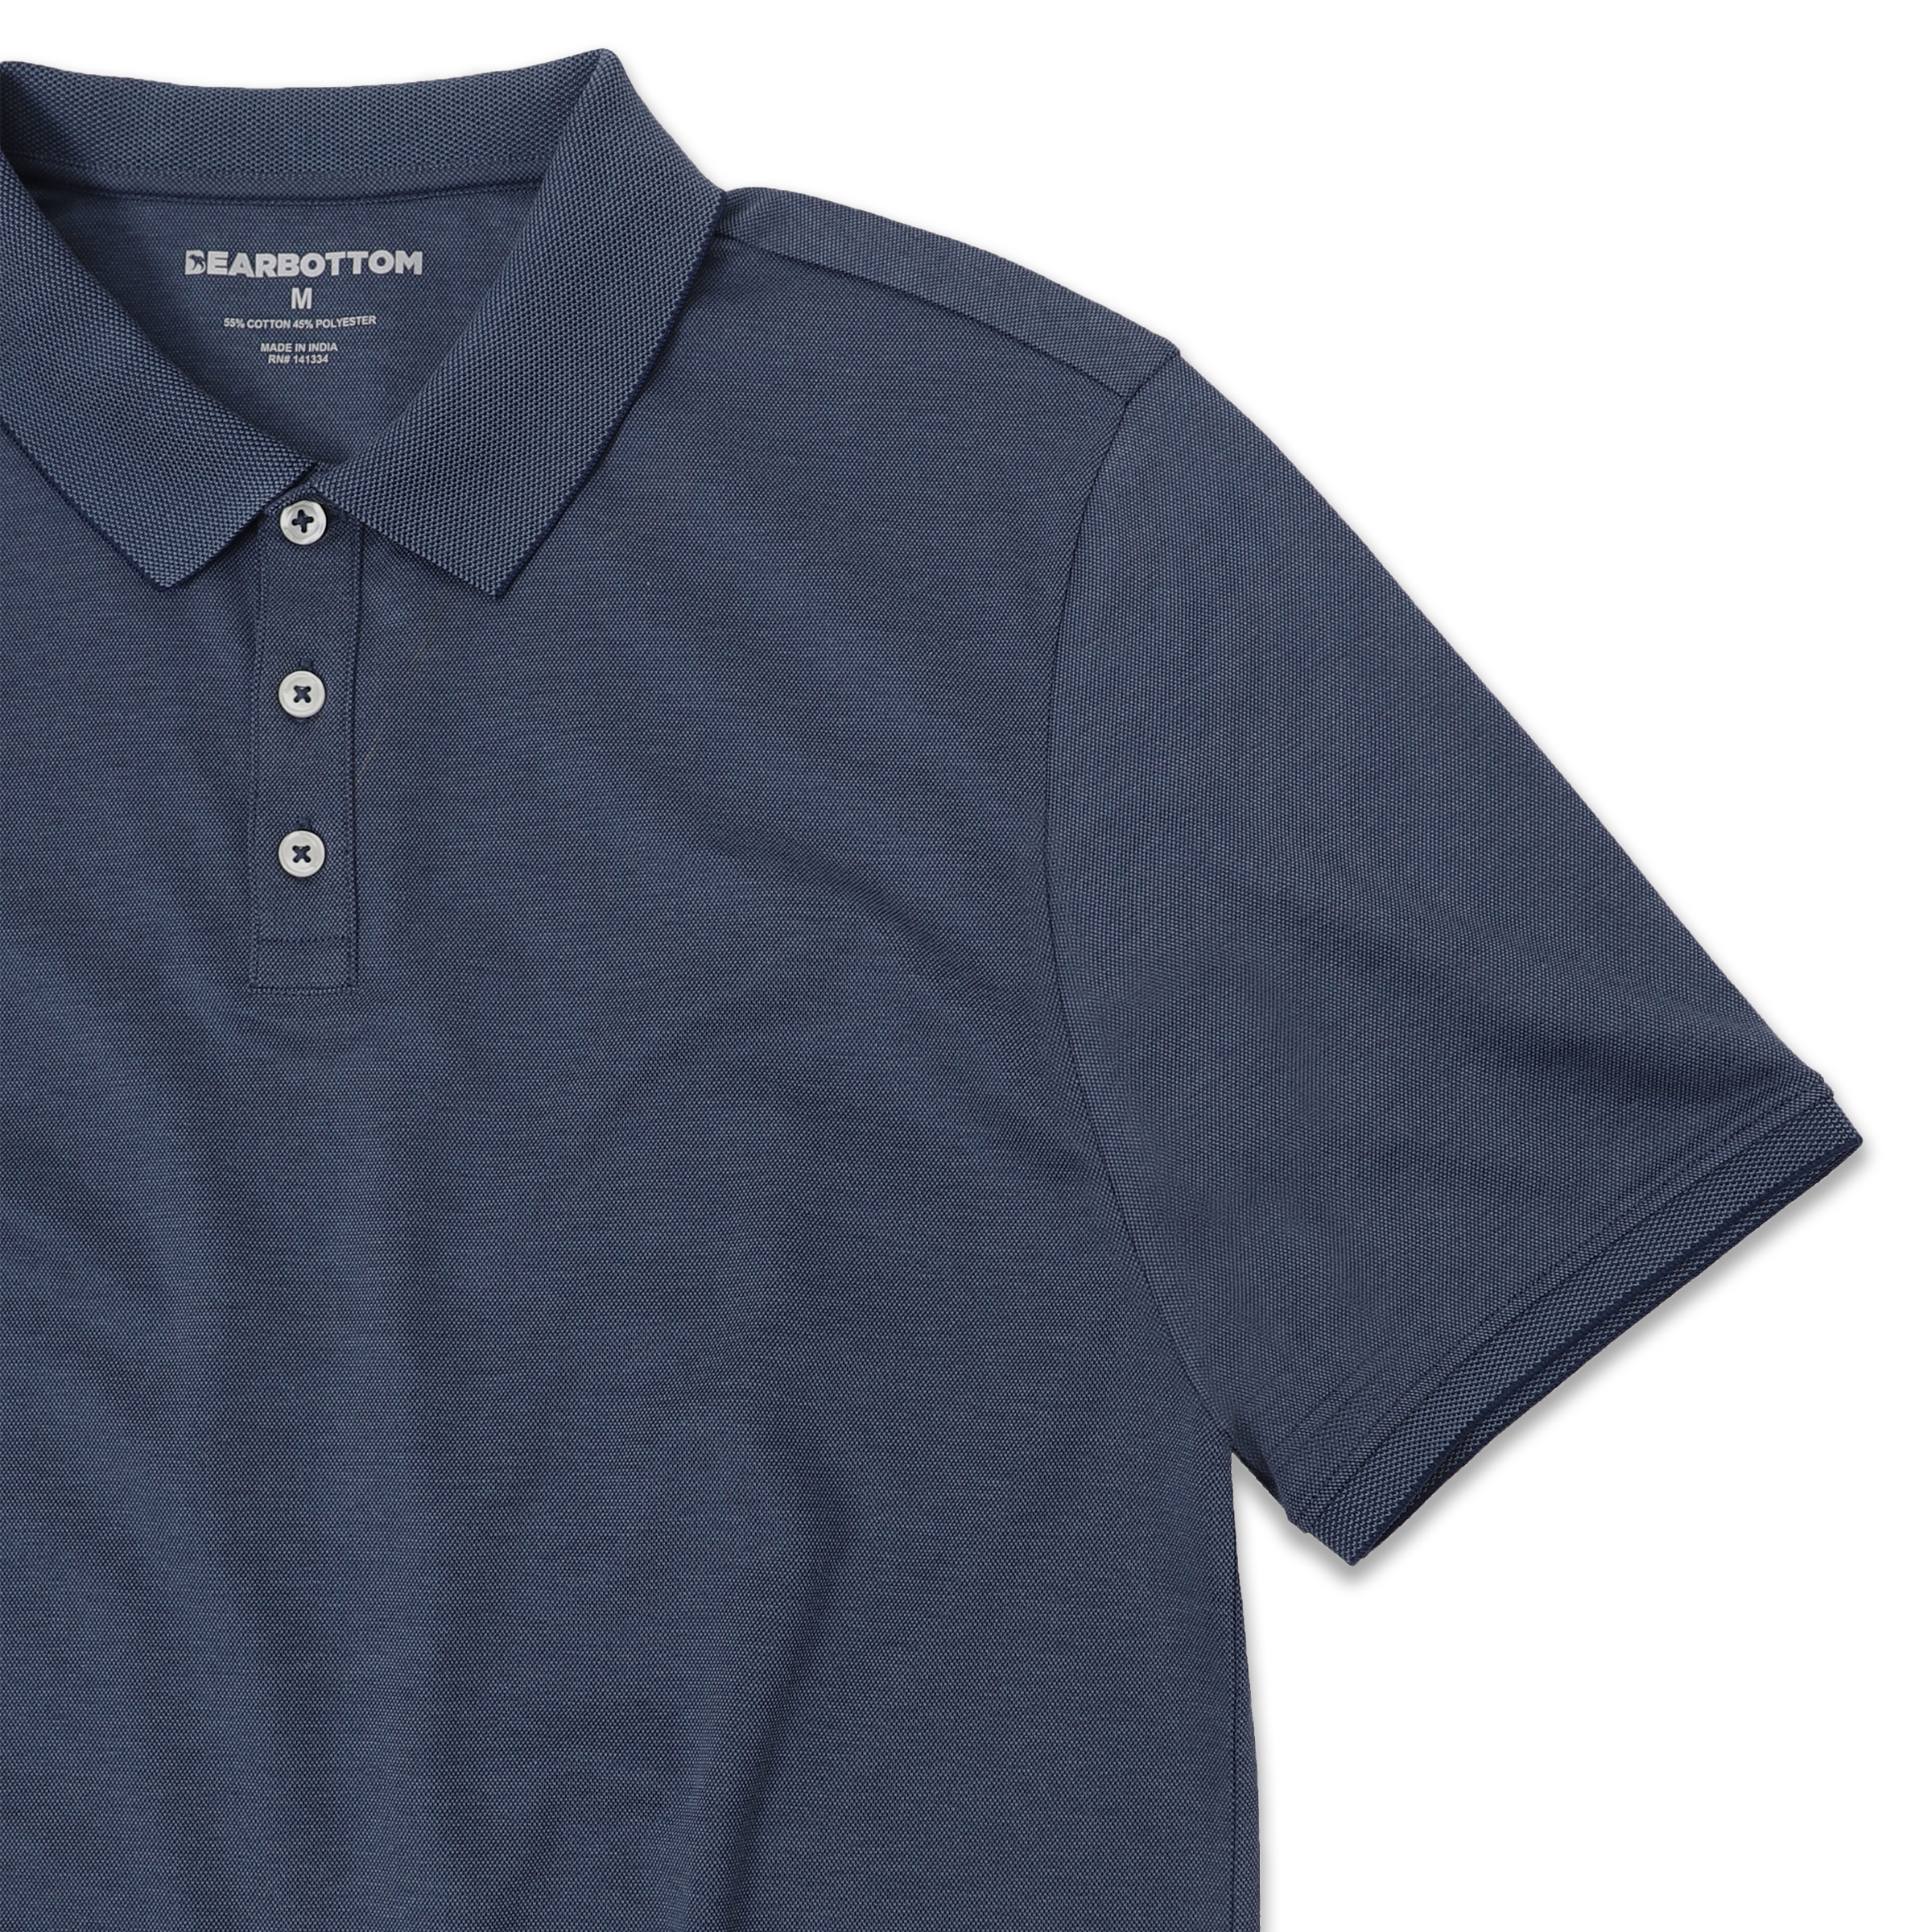 Range Polo Navy front close up with ribbed collar, ribbed short sleeves, and 3 white buttons